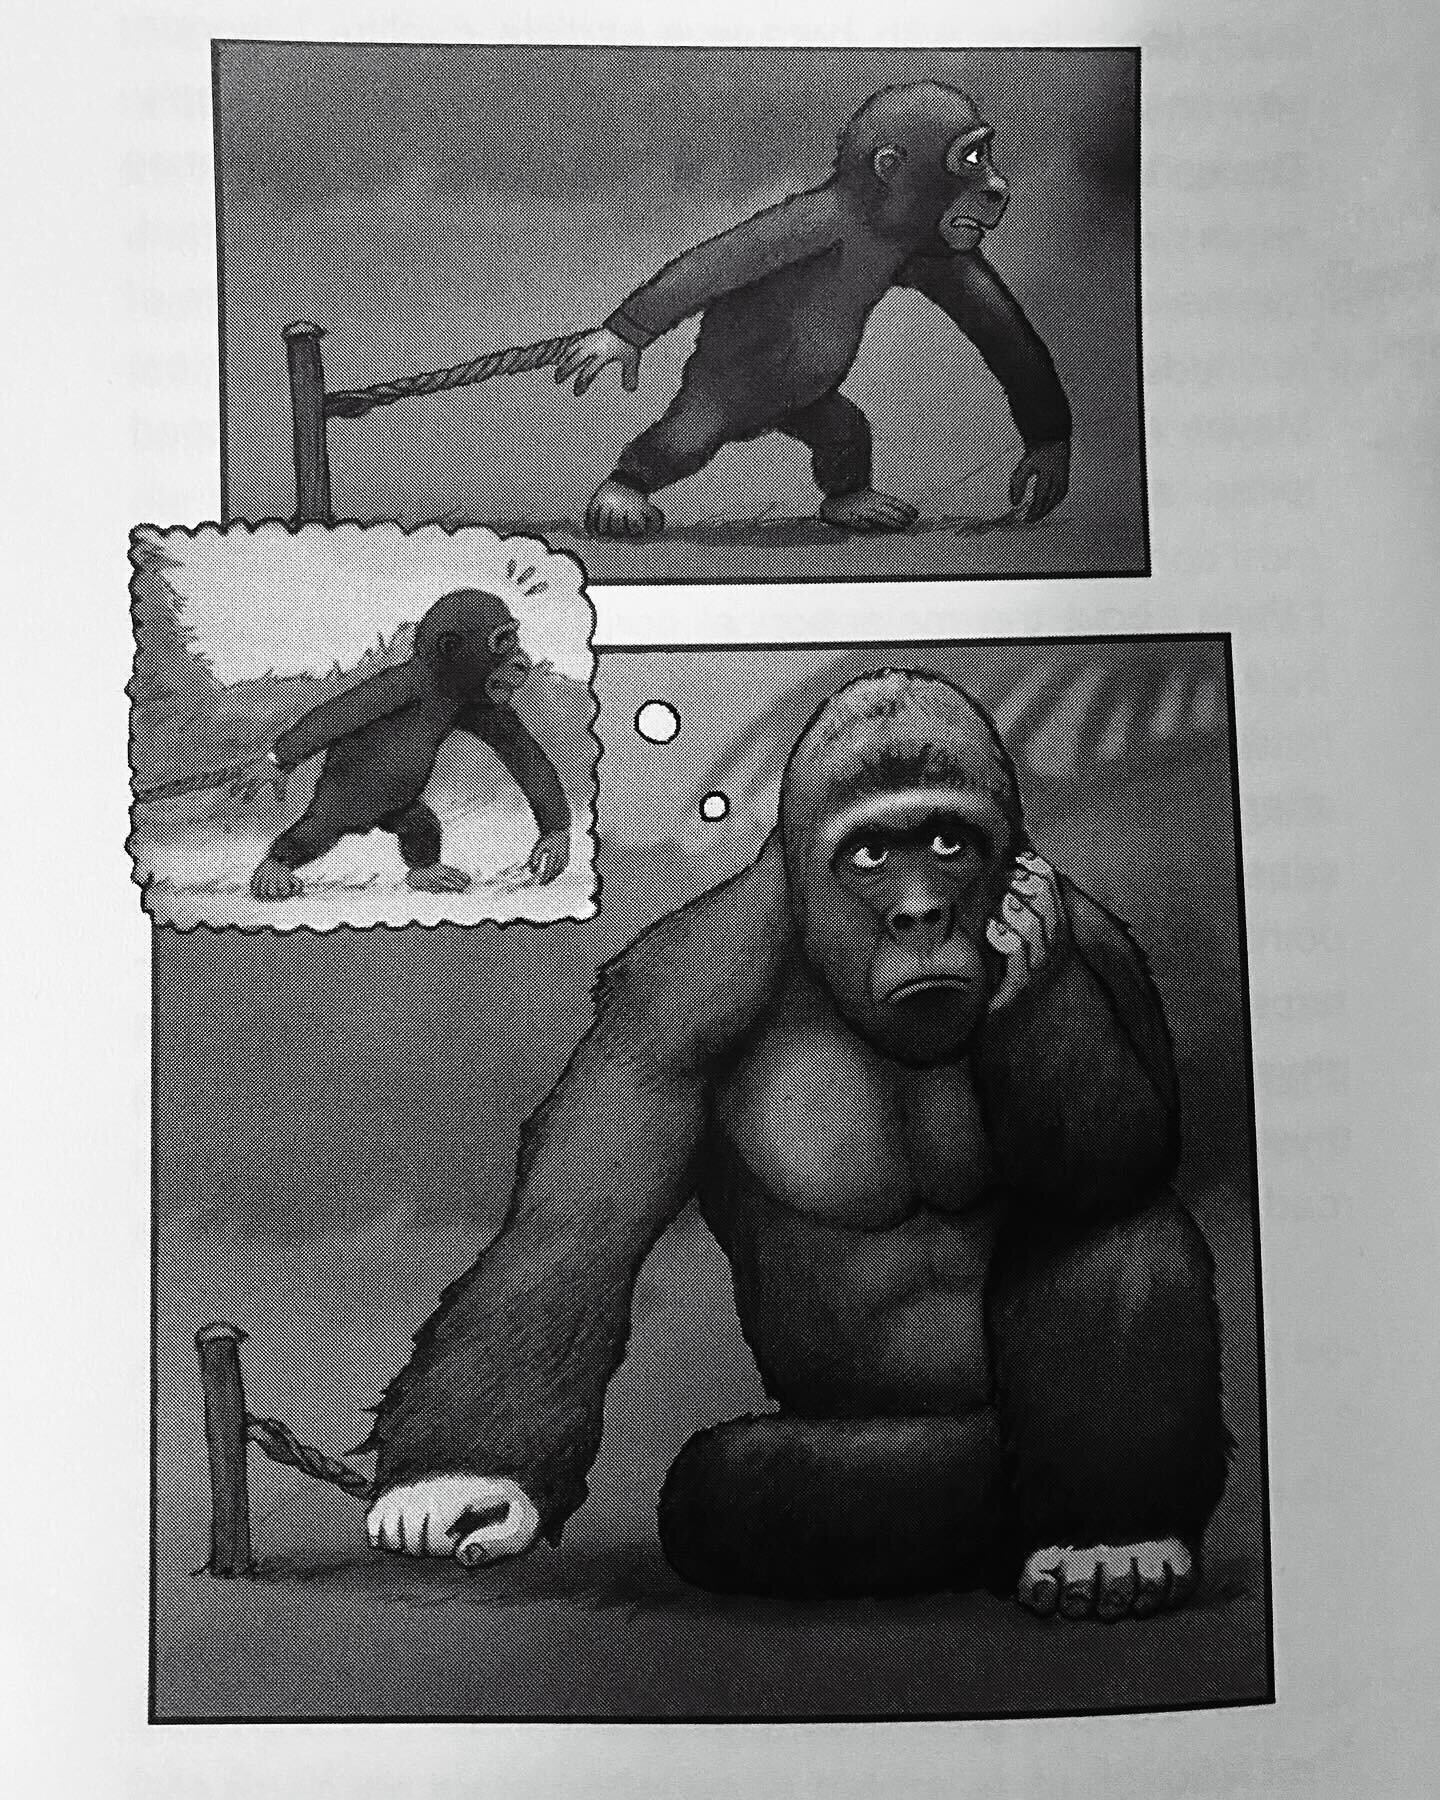 Just a little reminder of this old story about the metaphorical gorilla. There once was a baby gorilla chained to a pole by someone cruel. It was young and weak and therefore could not escape. This solidified in the child a belief of being trapped an